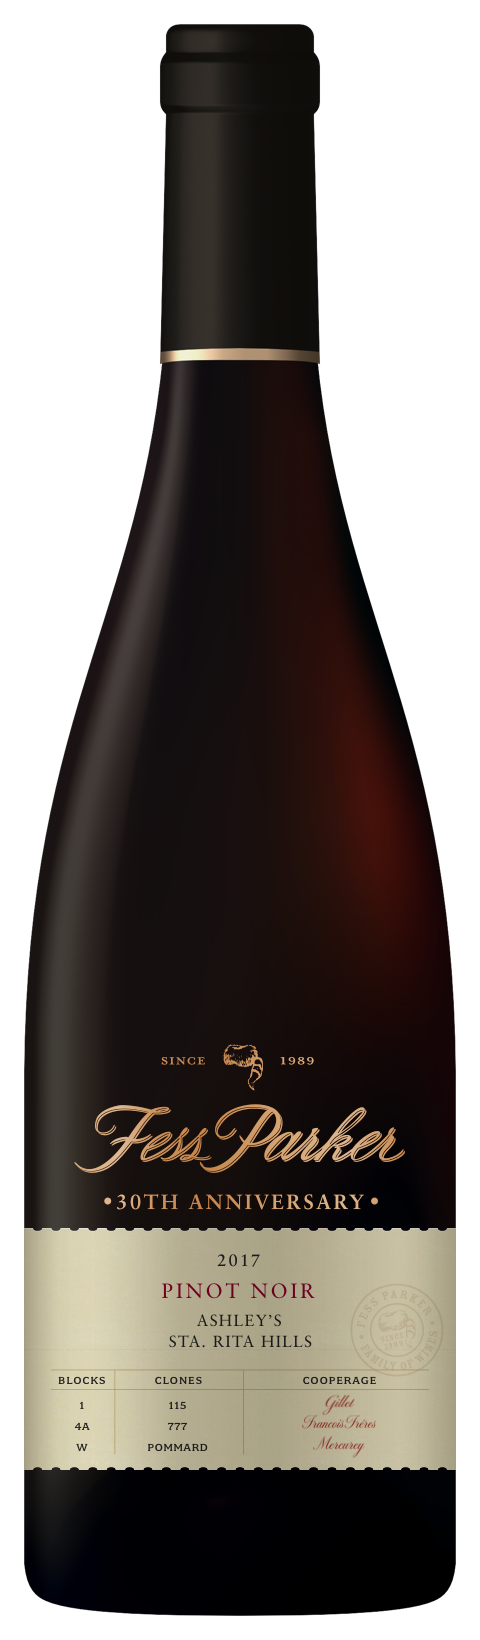 Fess Parker Wine Shop - Products - 2017 Ashley's Pinot 30th